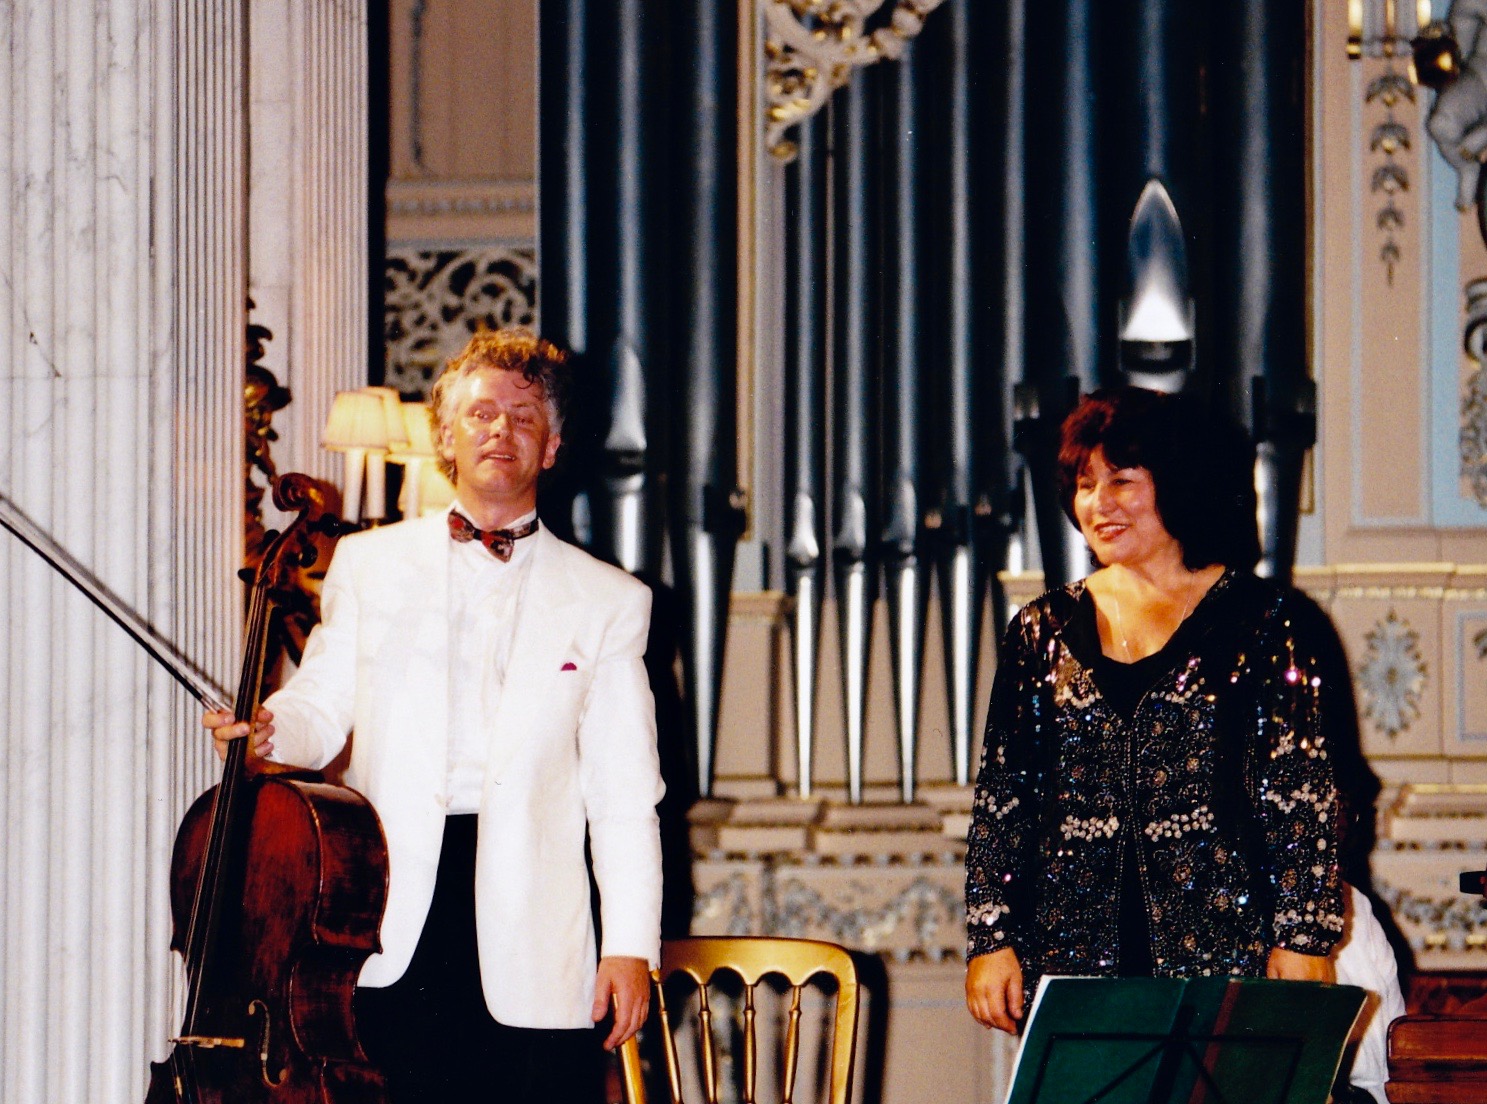 Concert with Moray Welsh at Blenheim Palace